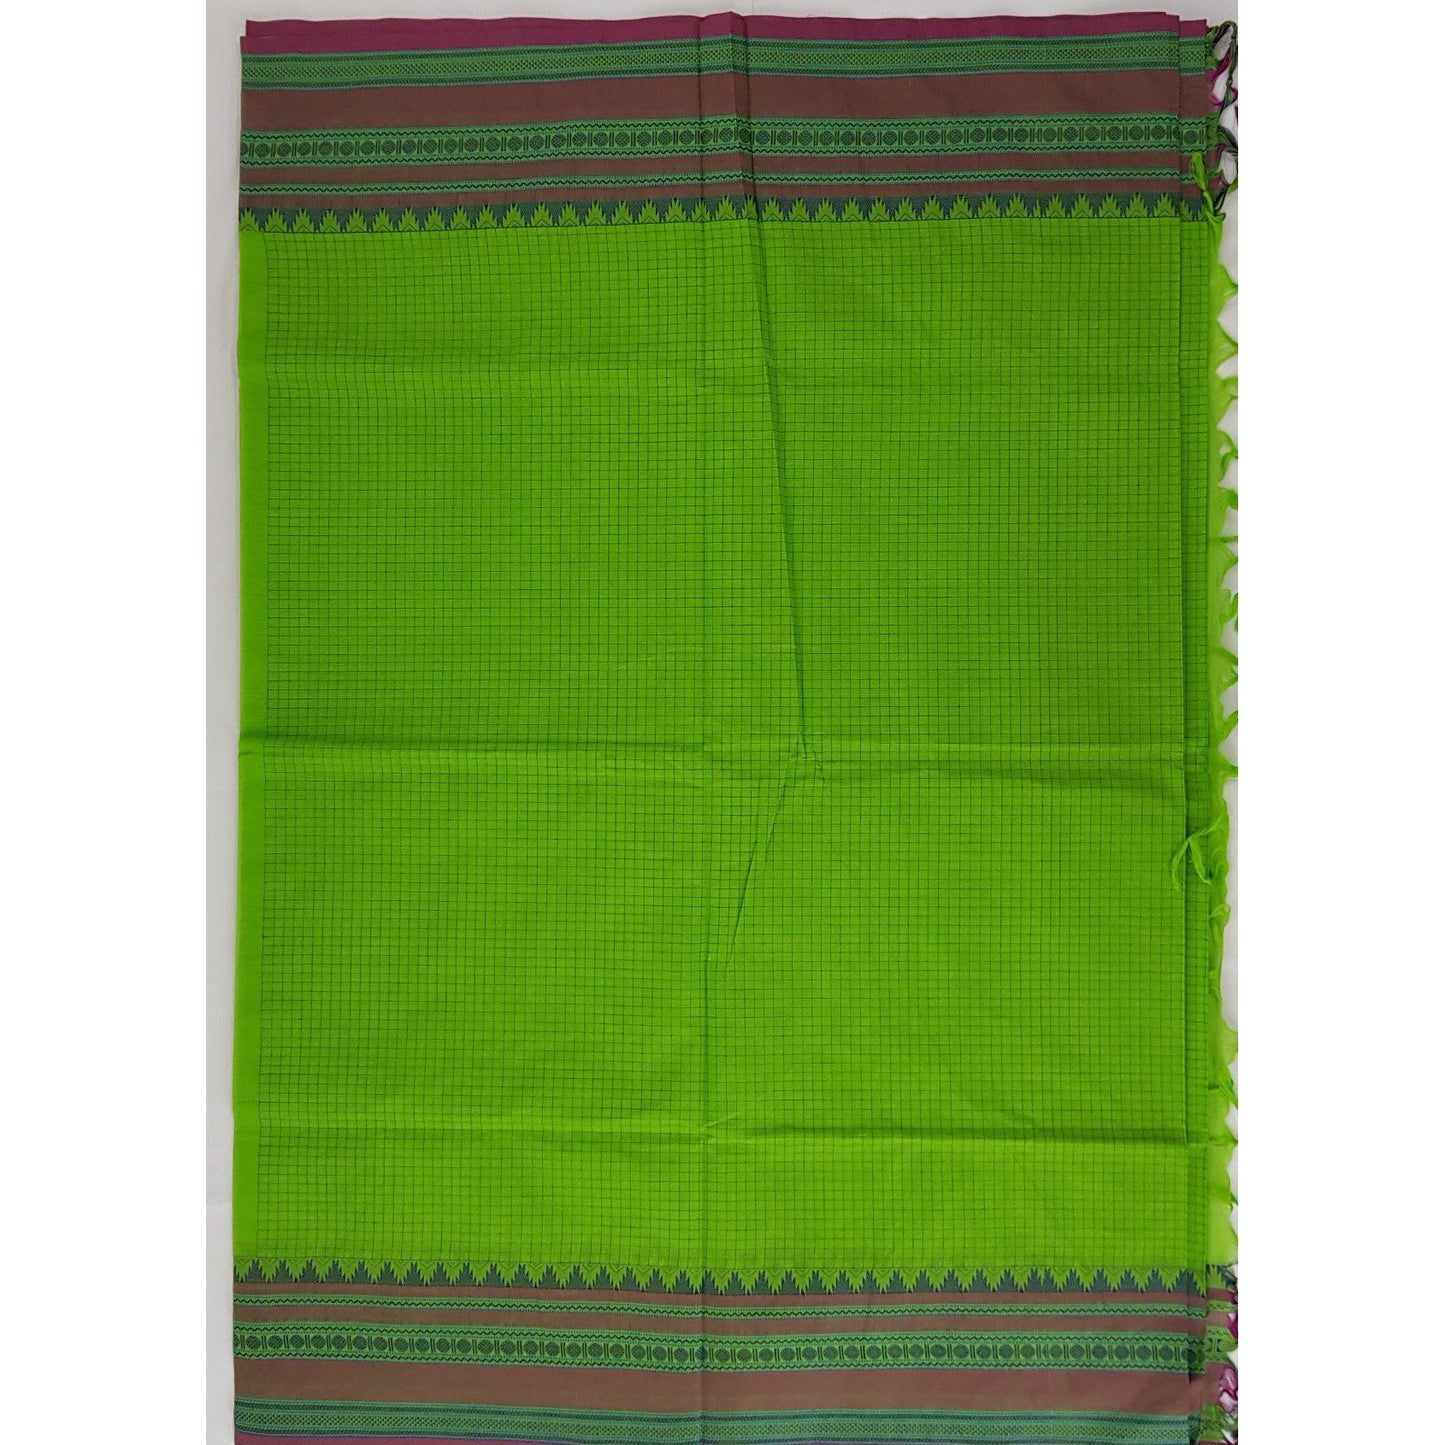 Parrot Green and Pink Color Kanchi cotton saree with thread border and Rich Pallu - Vinshika